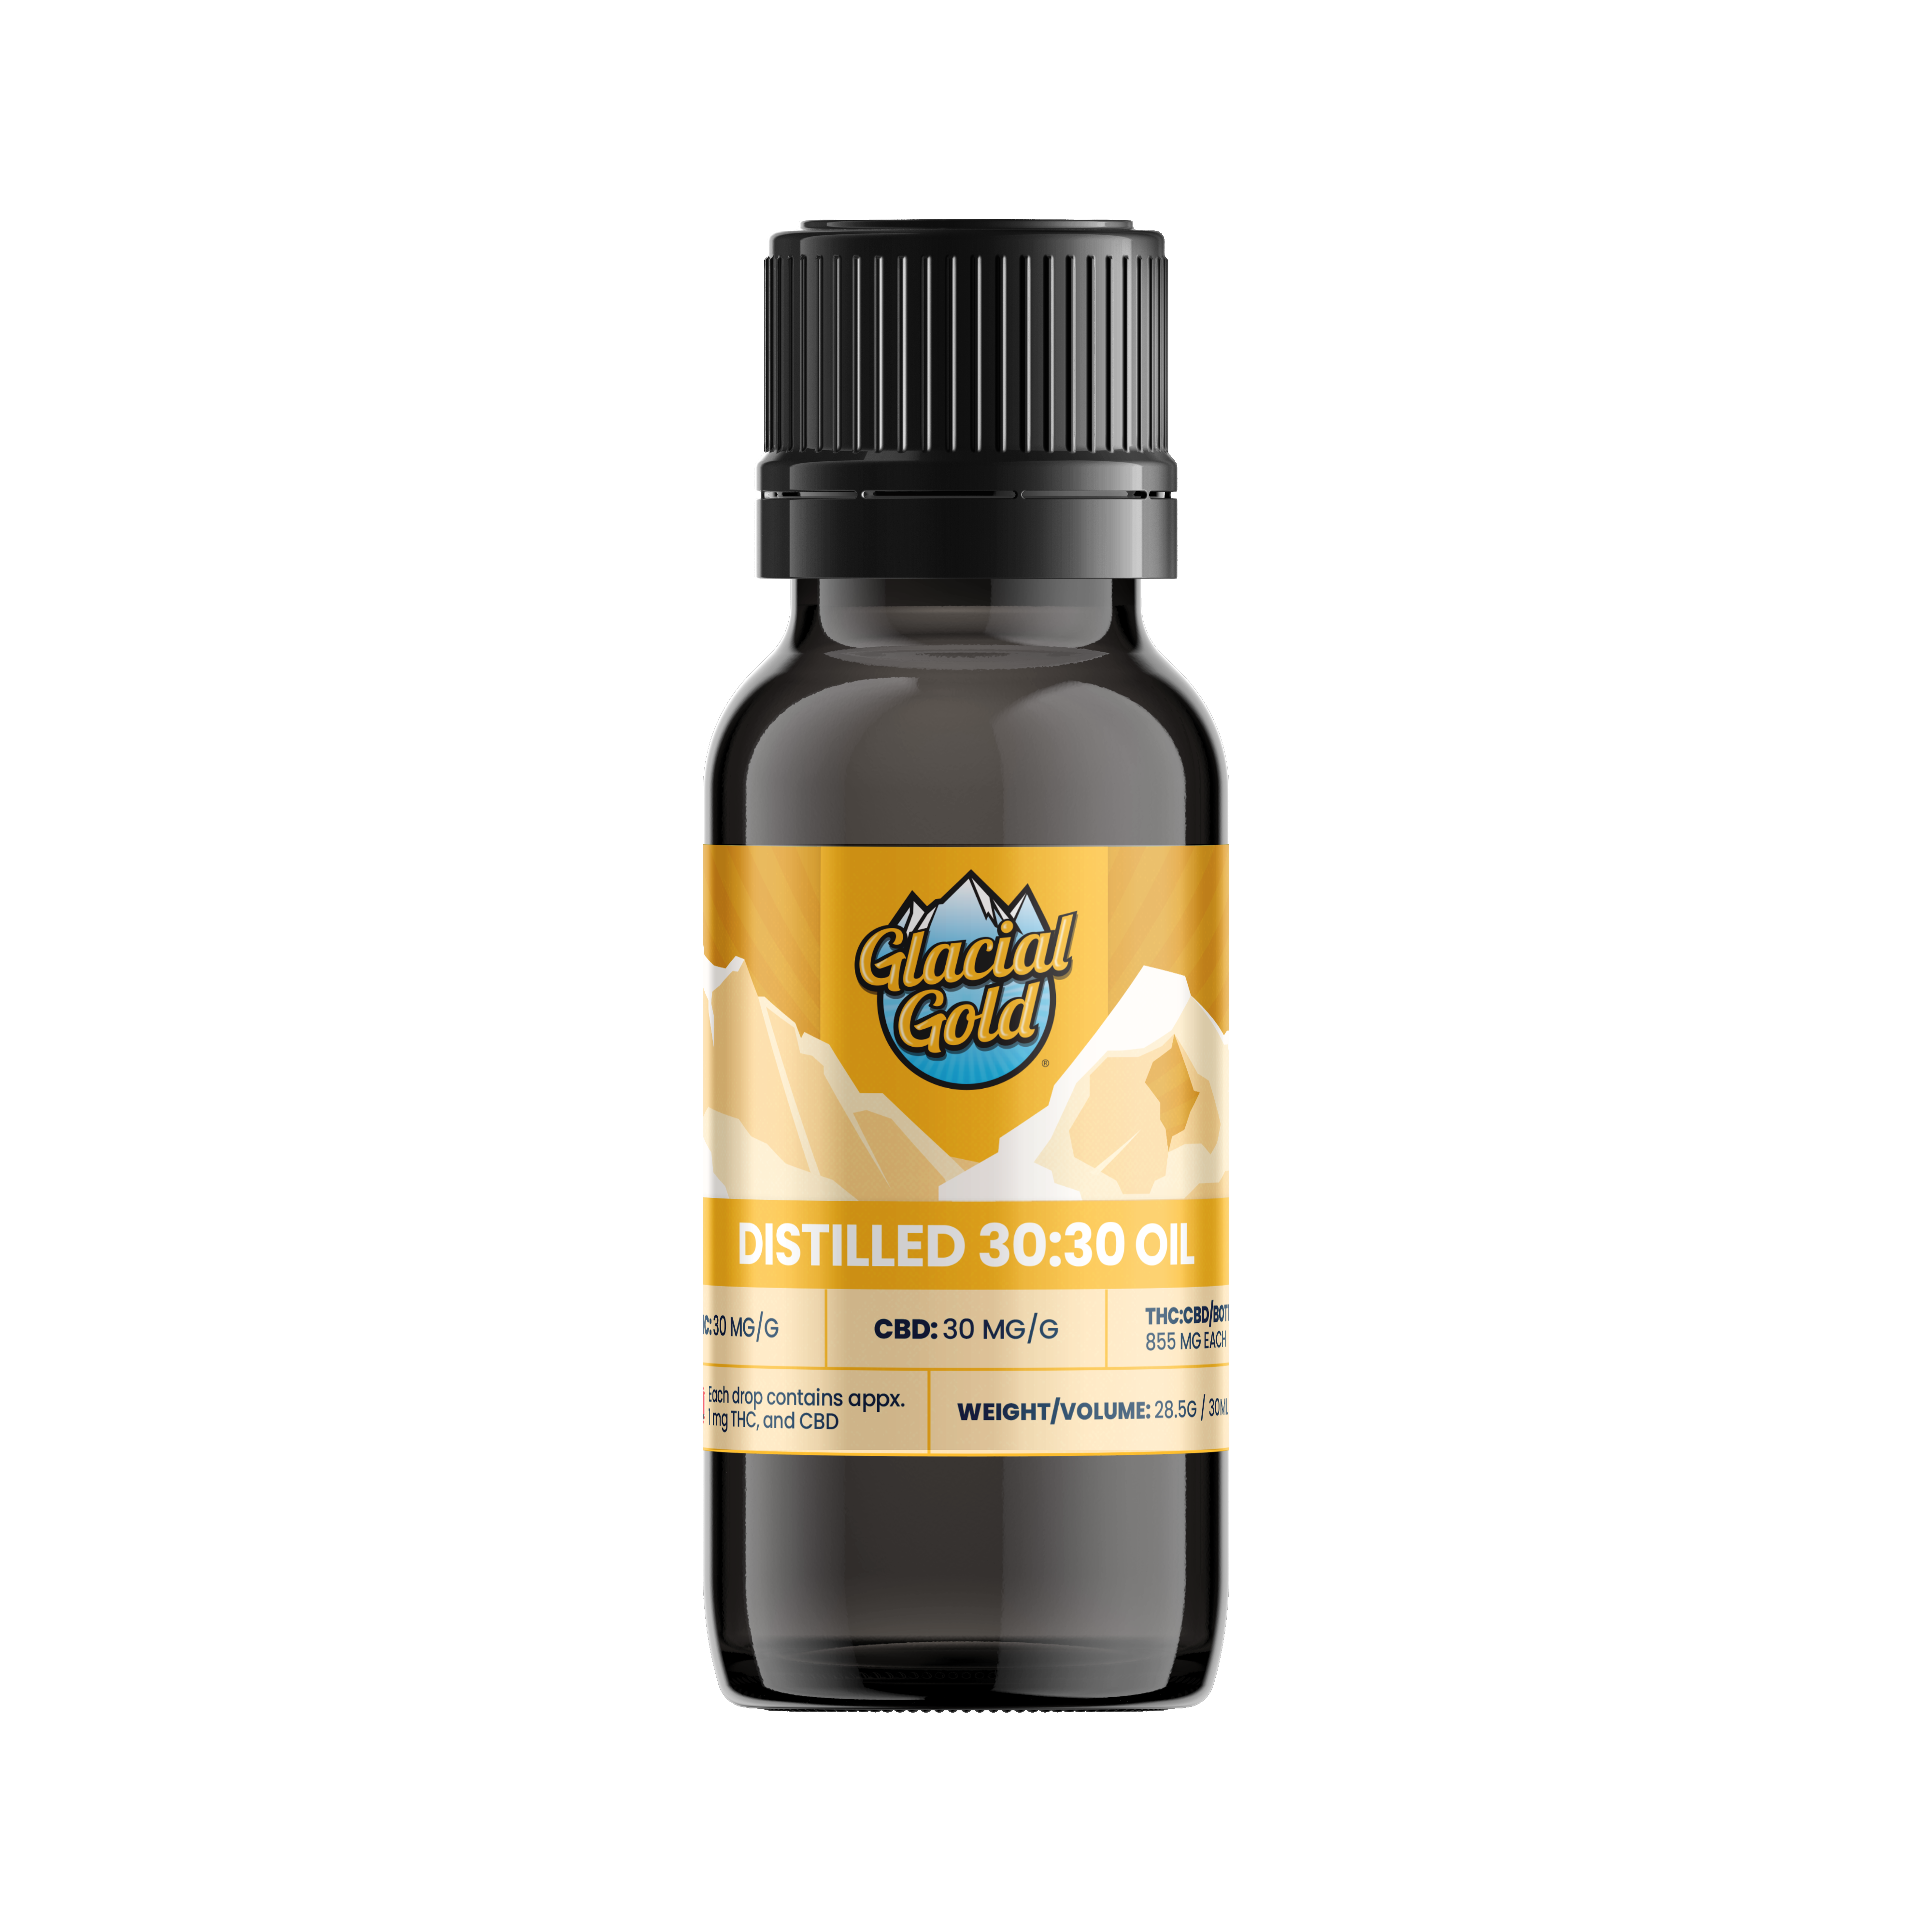 Cannabis Product Glacial Gold - Distilled 30:30 Oil Drops by Glacial Gold - 2